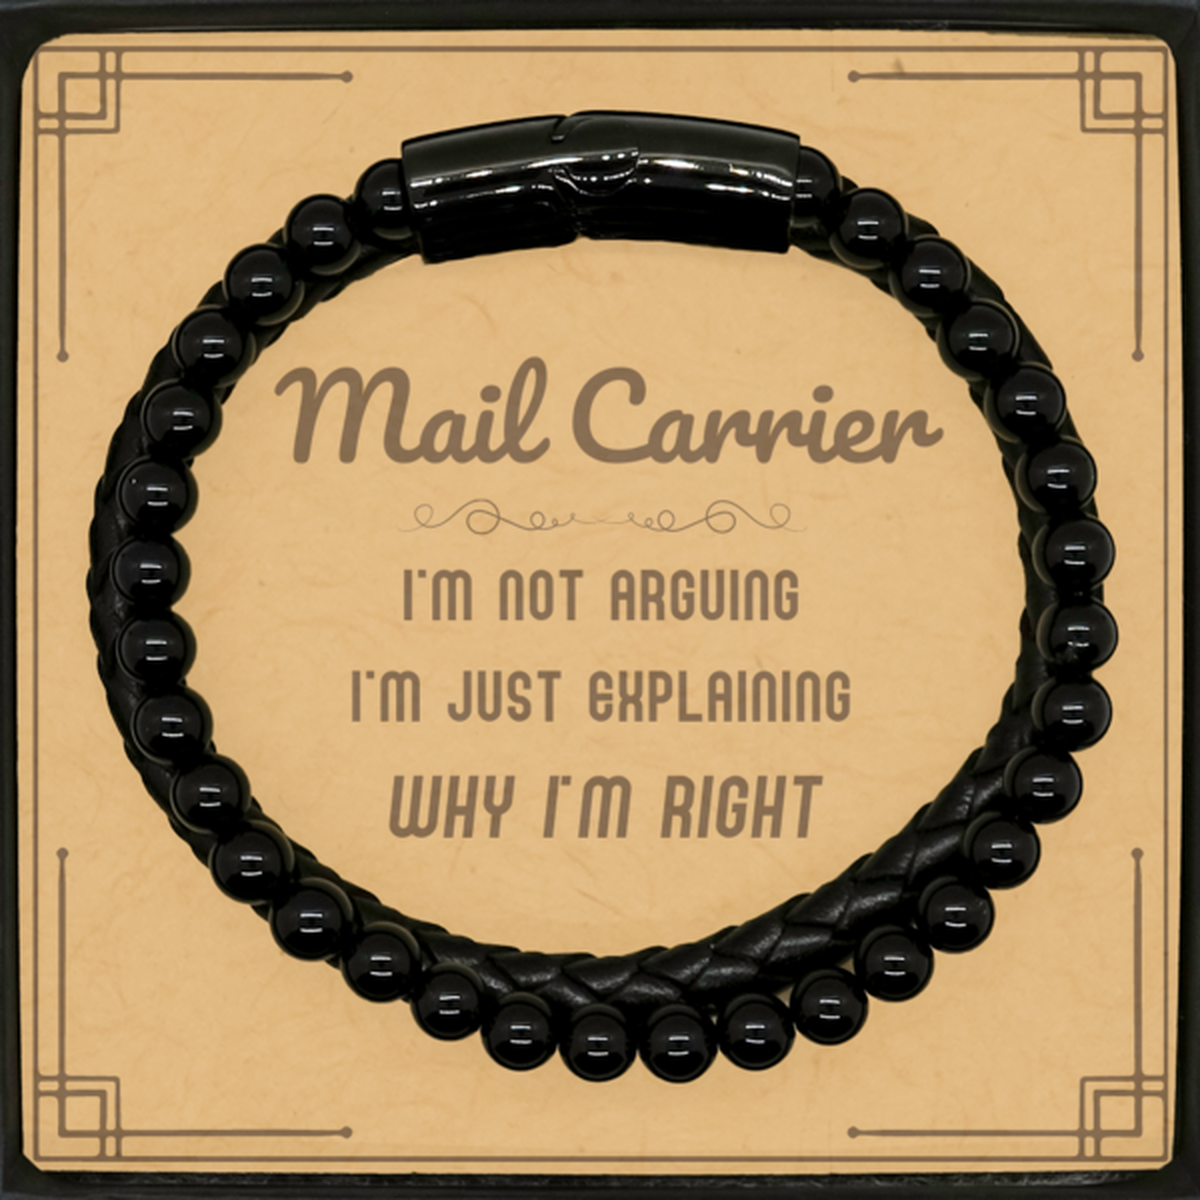 Mail Carrier I'm not Arguing. I'm Just Explaining Why I'm RIGHT Stone Leather Bracelets, Funny Saying Quote Mail Carrier Gifts For Mail Carrier Message Card Graduation Birthday Christmas Gifts for Men Women Coworker